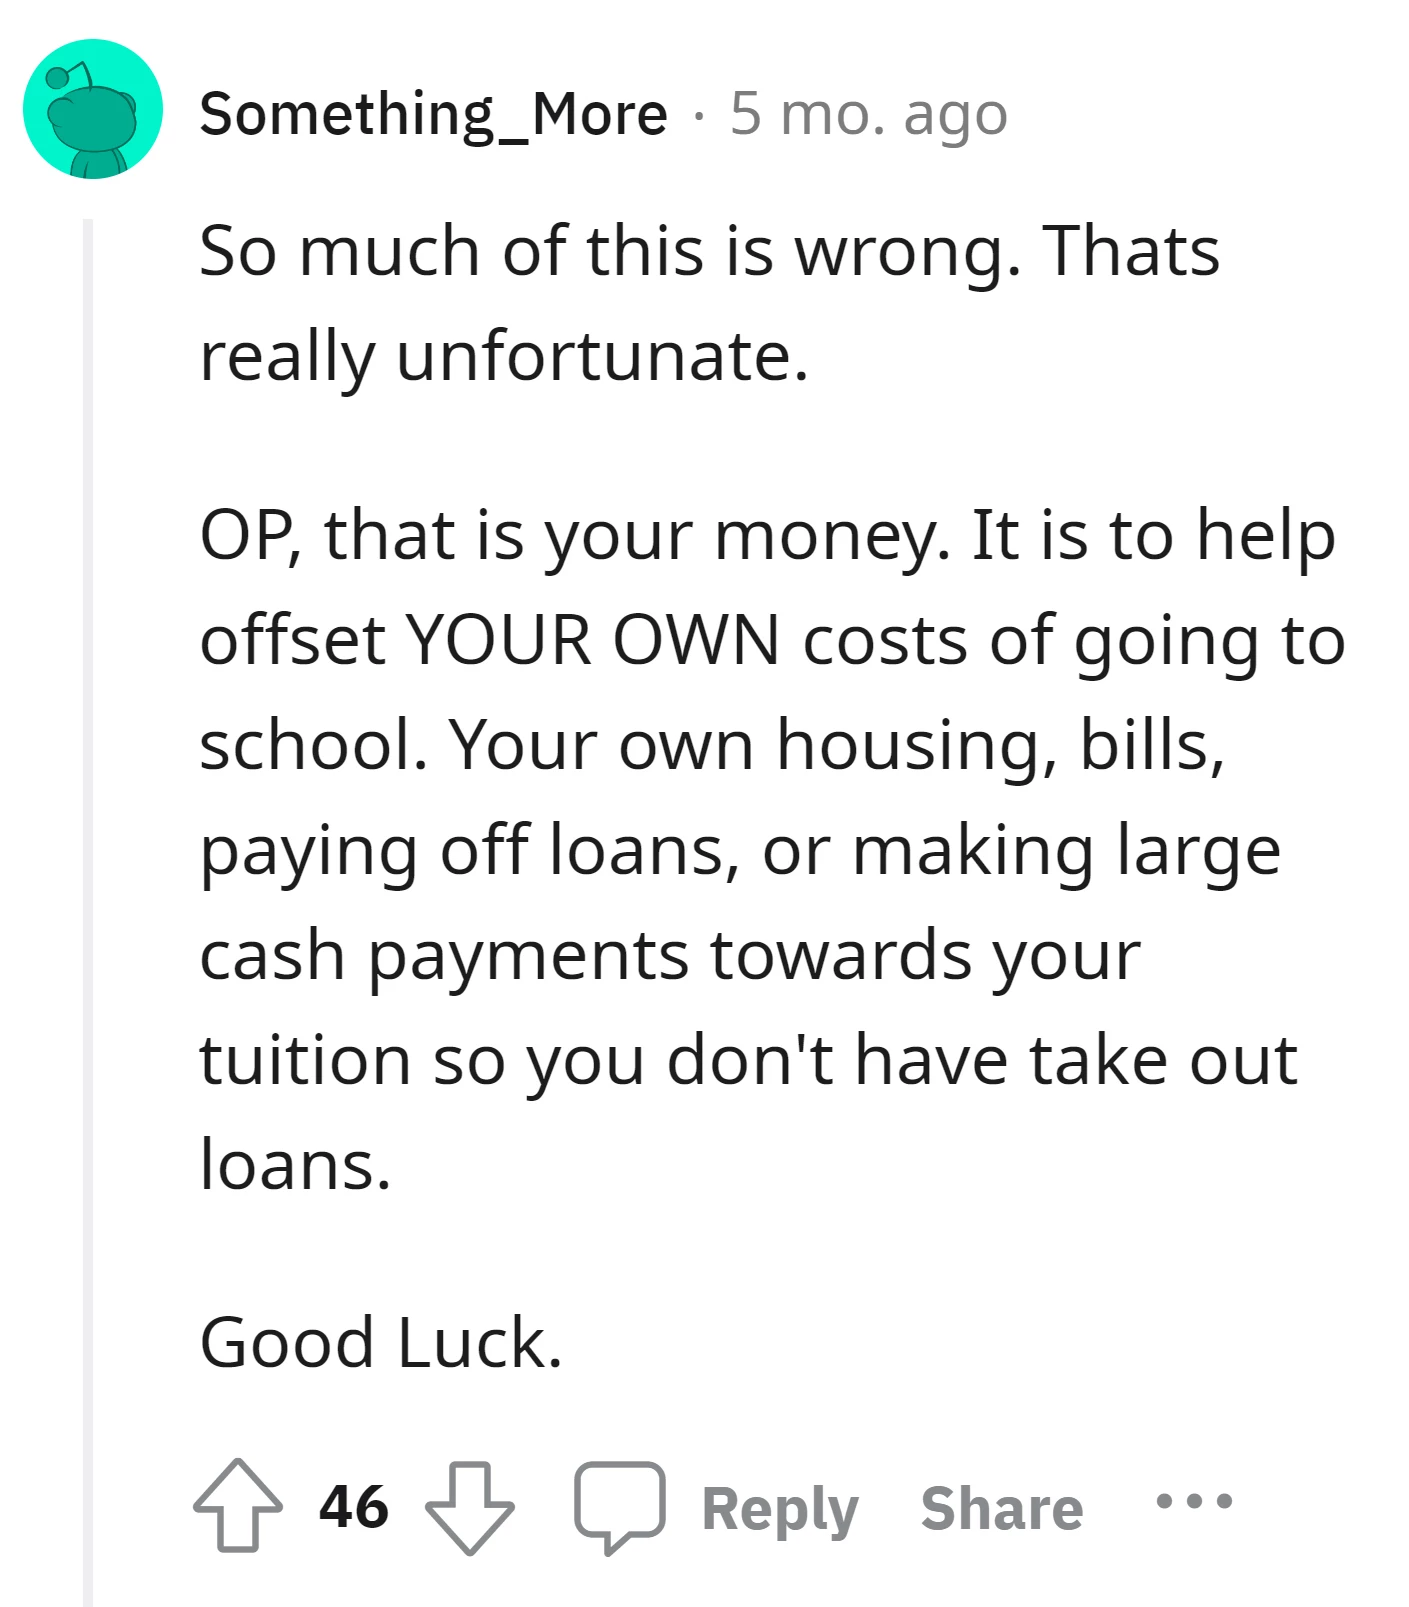 The money is indeed meant for the Redditor's education-related expenses